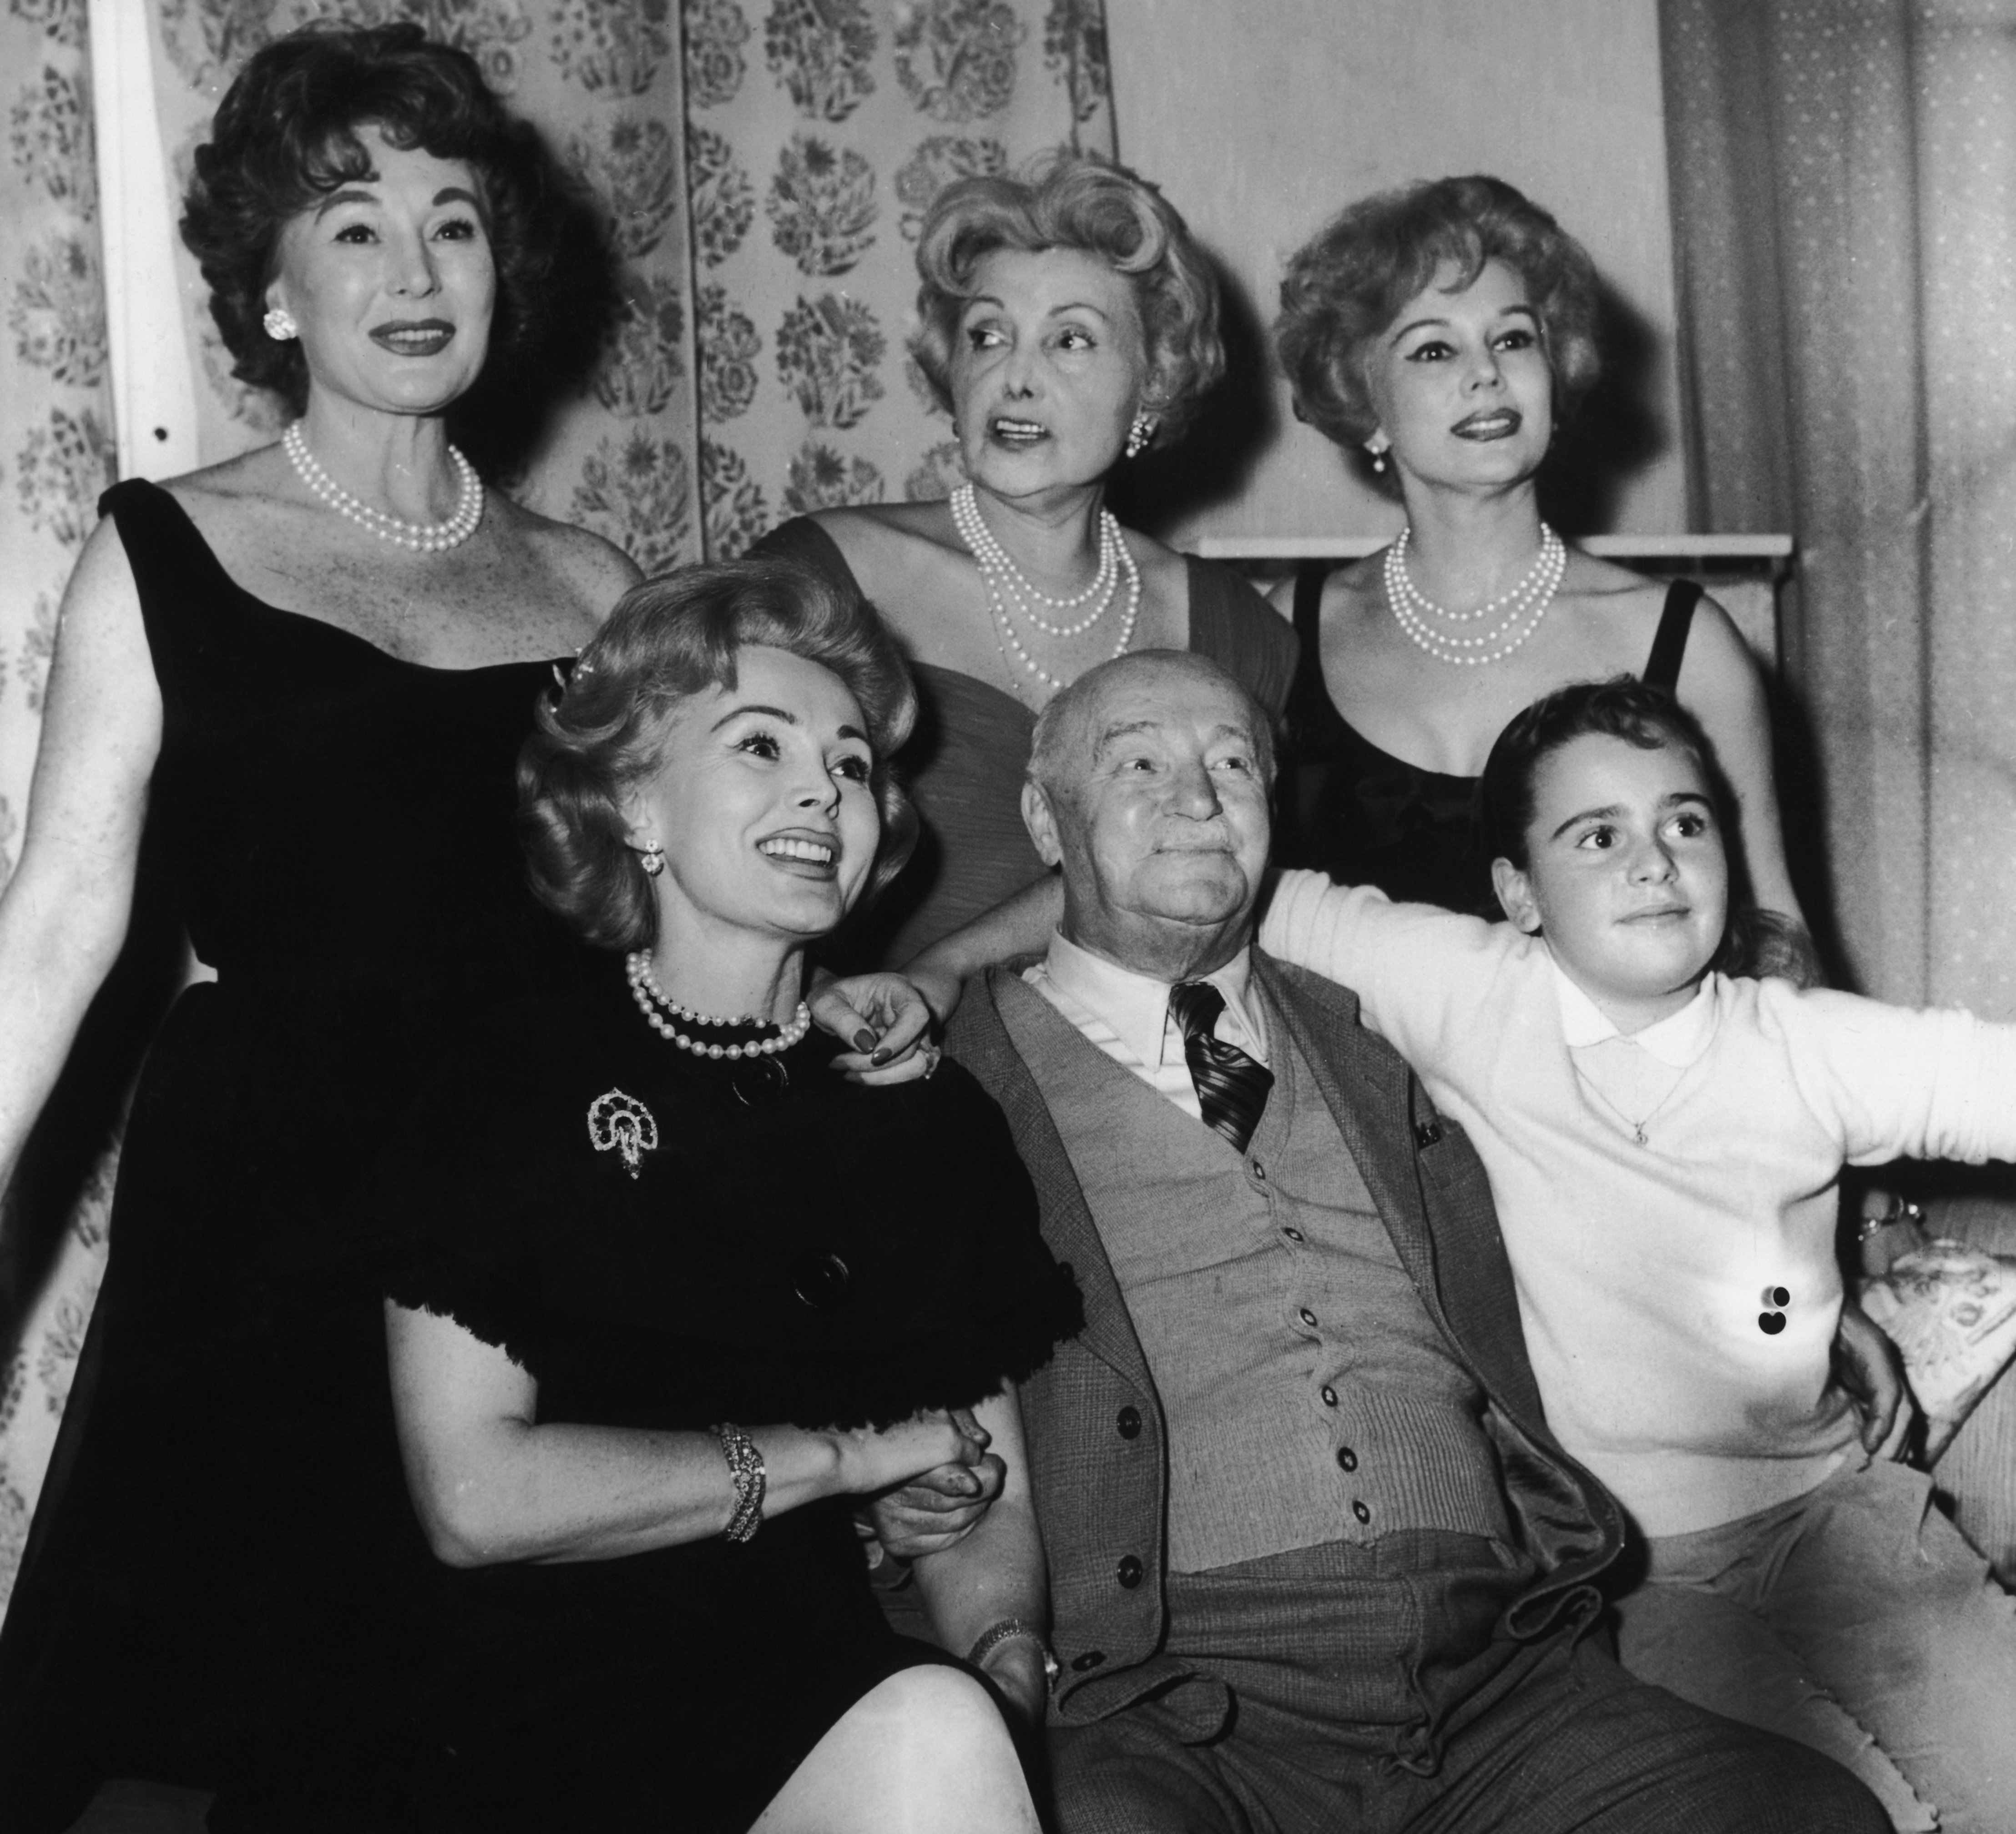 Hungarian actress and socialite Zsa Zsa Gabor with her family at the Hotel Sacher in Vienna, October 01, 1958. Photo: Getty Images